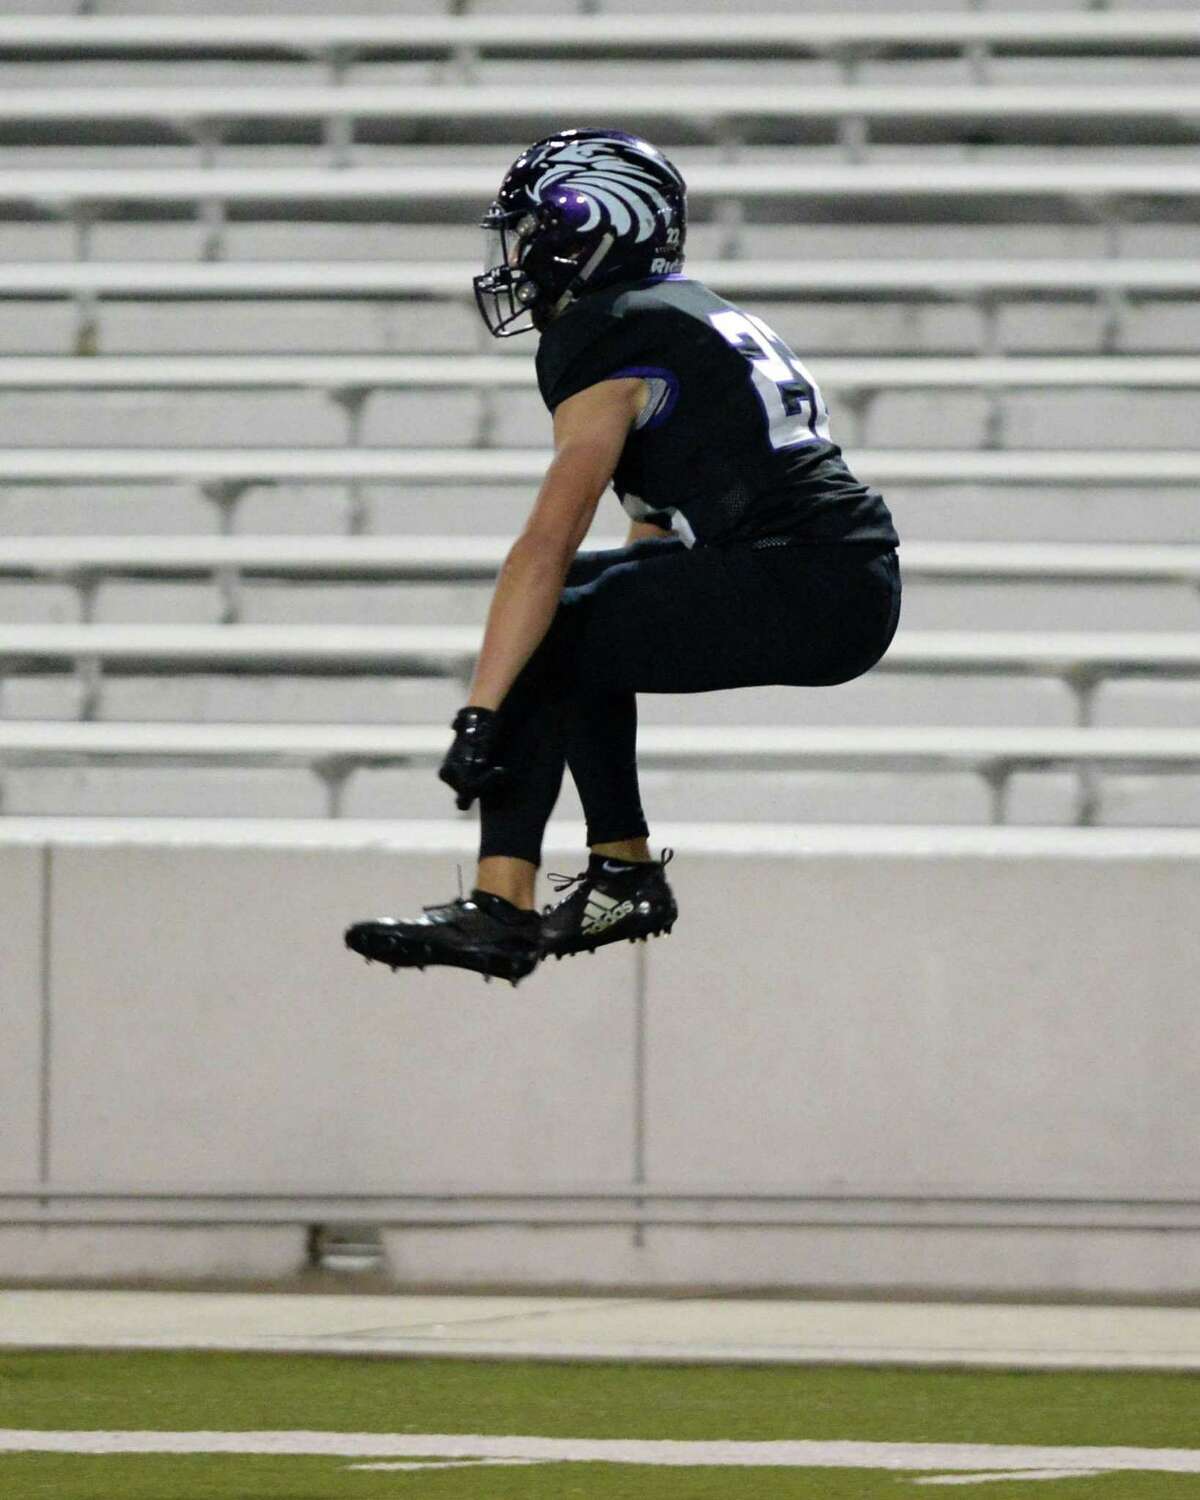 Victor Garza (22) of Kinkaid celebrates a touchdown reception in the final seconds of the second quarter of the SPC Class 4A Championship football game between the Episcopal Knights and the Kinkaid Falcons on Saturday, November 10, 2018 at Delmar Stadium, Houston, TX.